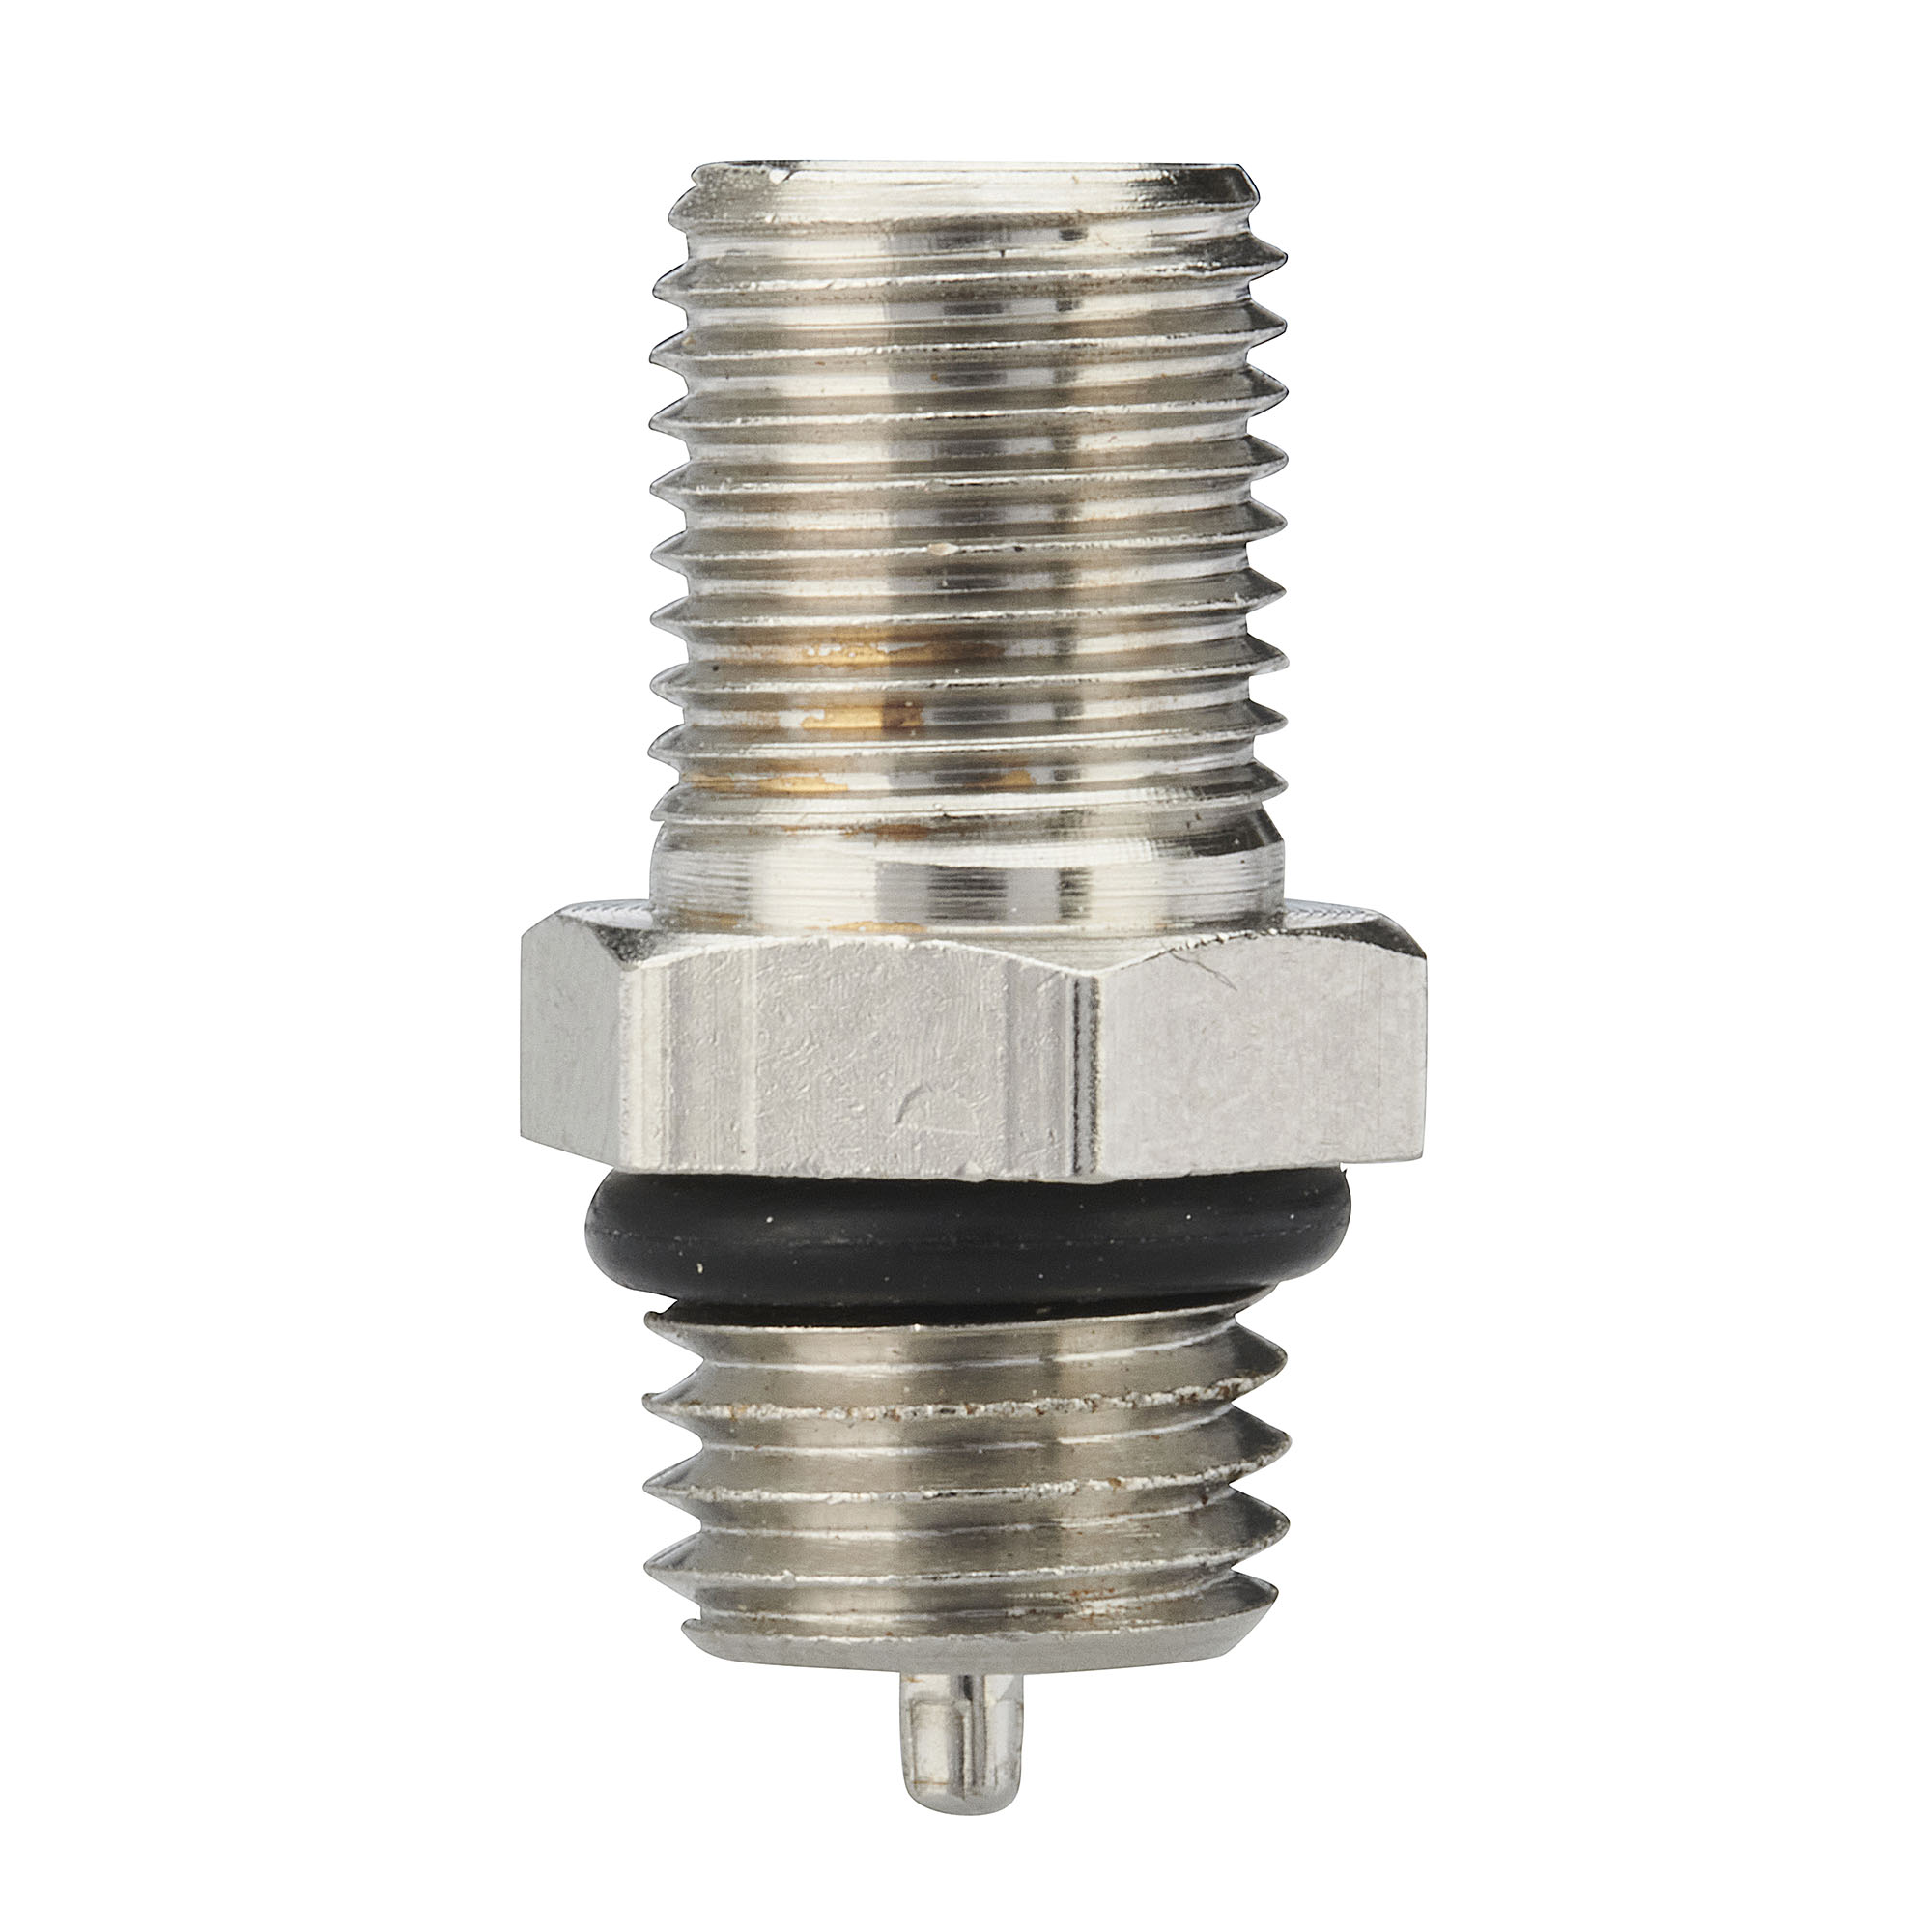 Threaded connection - Rubber base valve, 18mm, M8×1